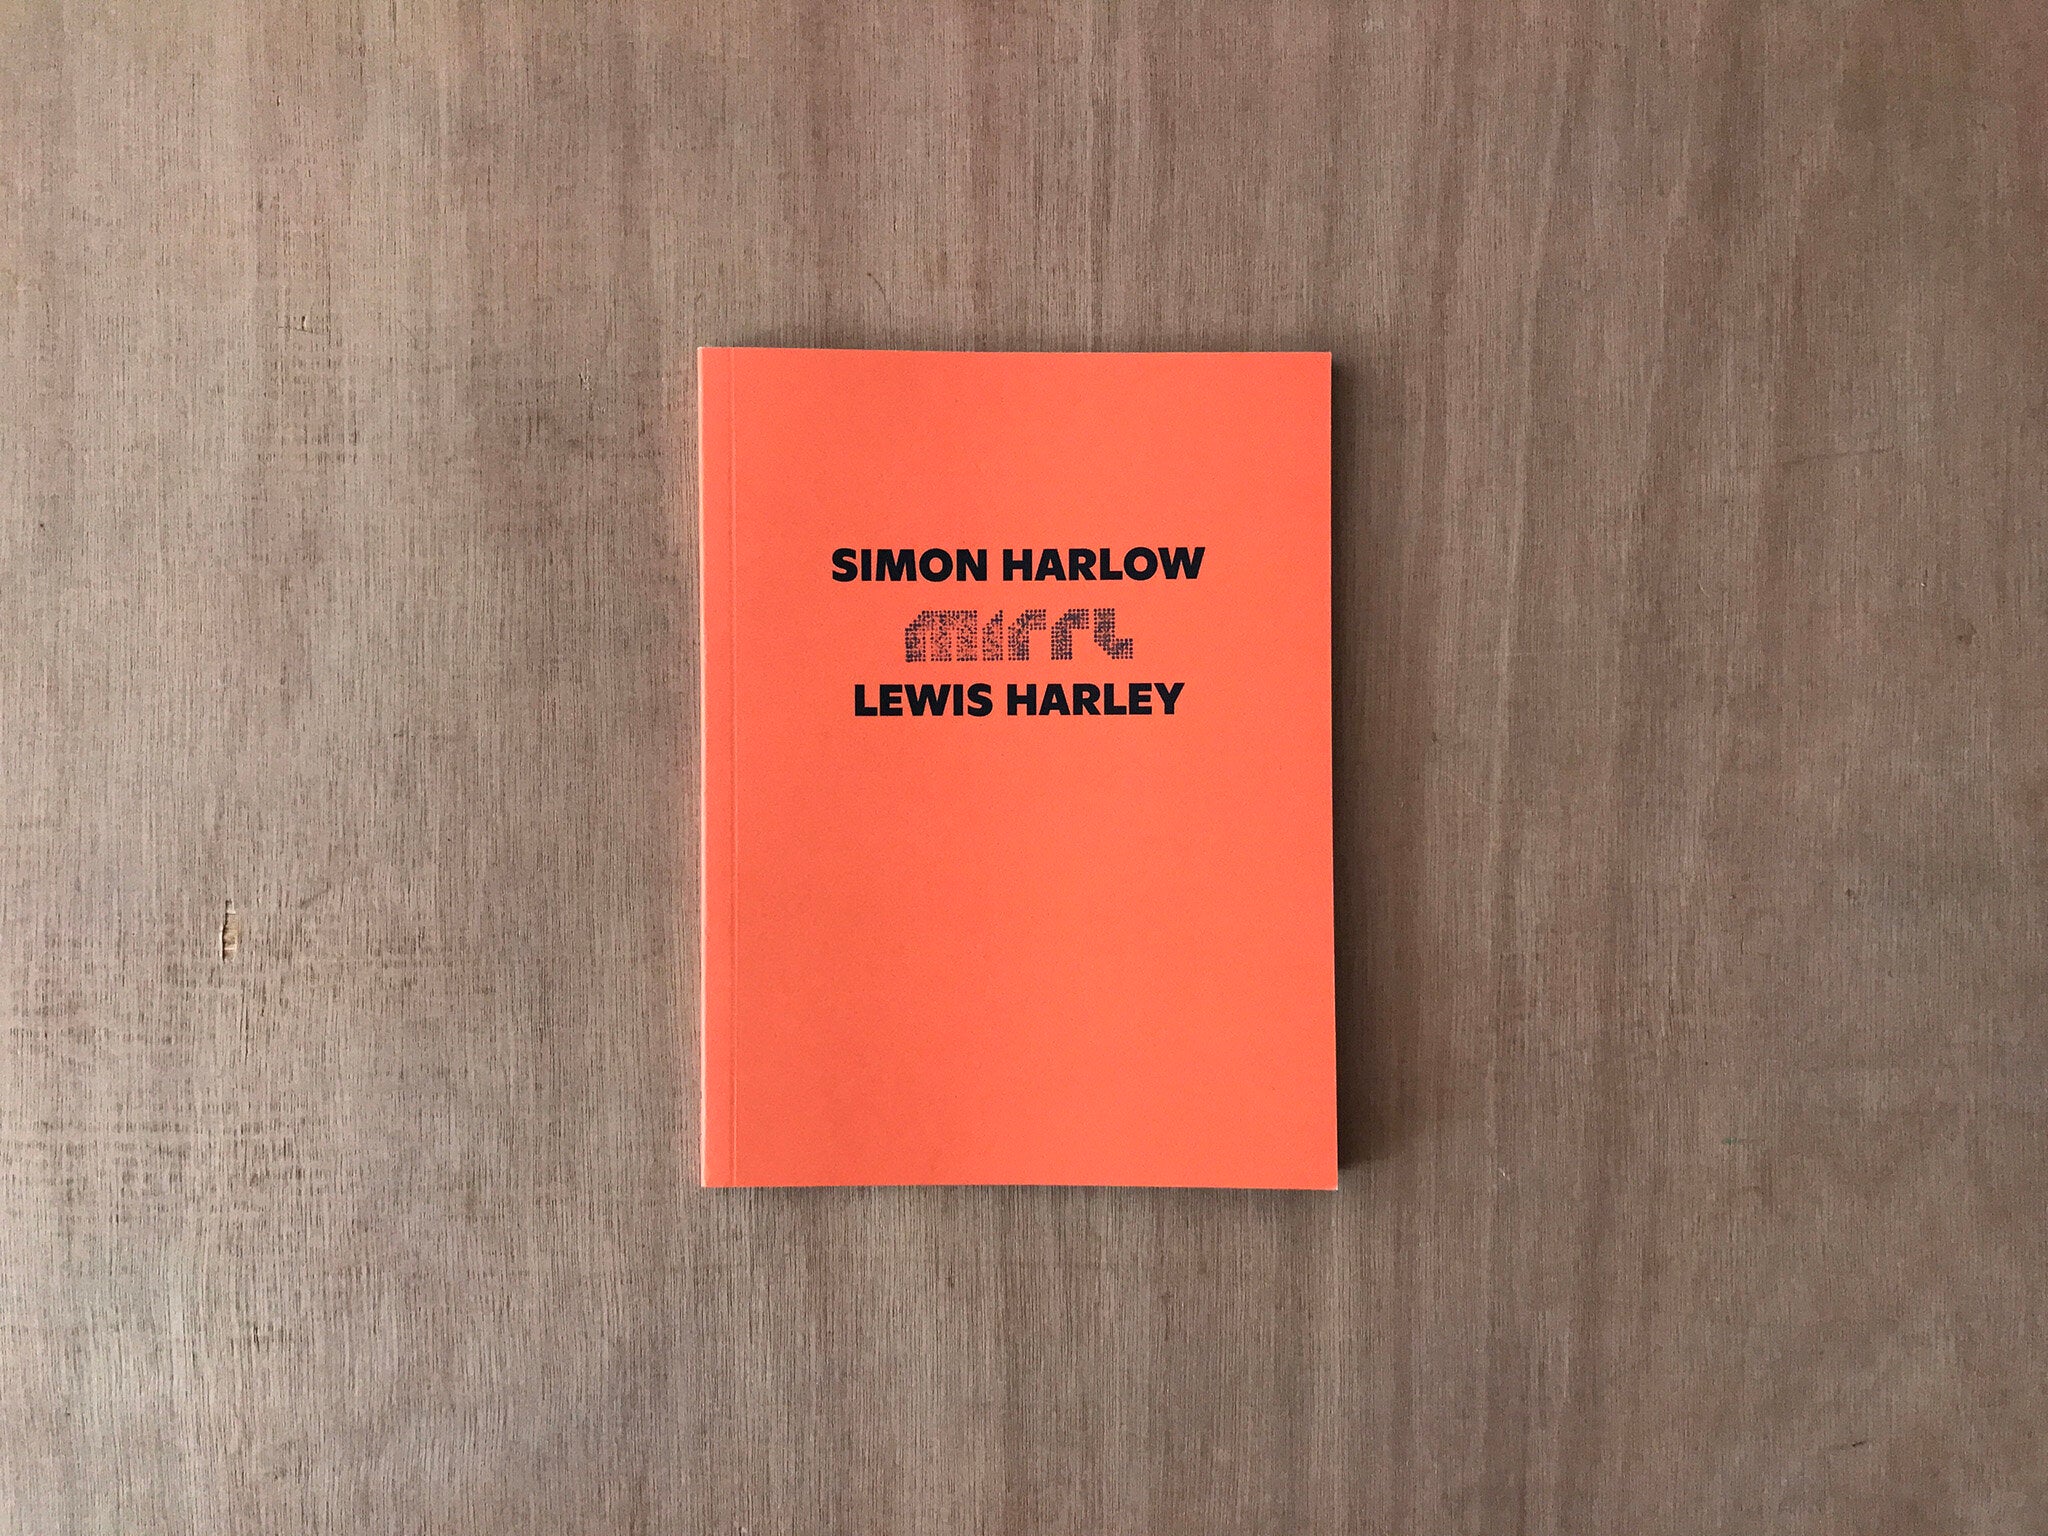 MIRRL by Simon Harlow and Lewis Harley